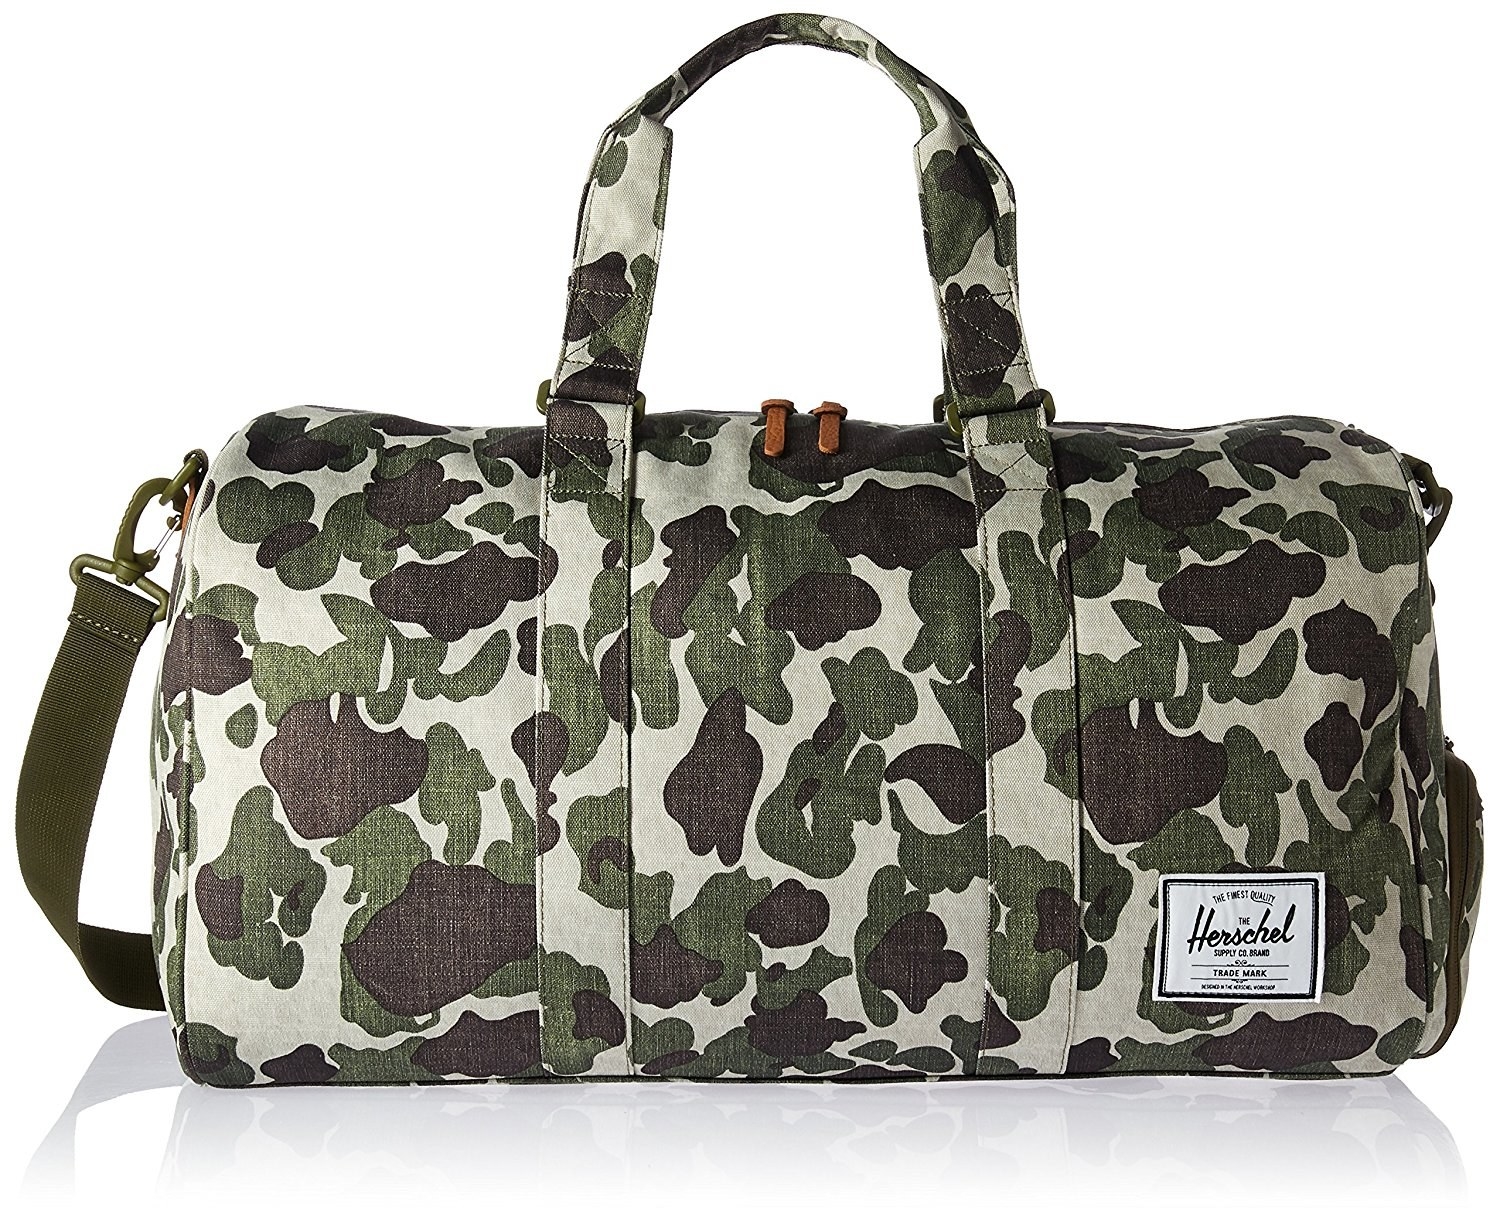 17 Of The Best Weekender Bags You Can Get On